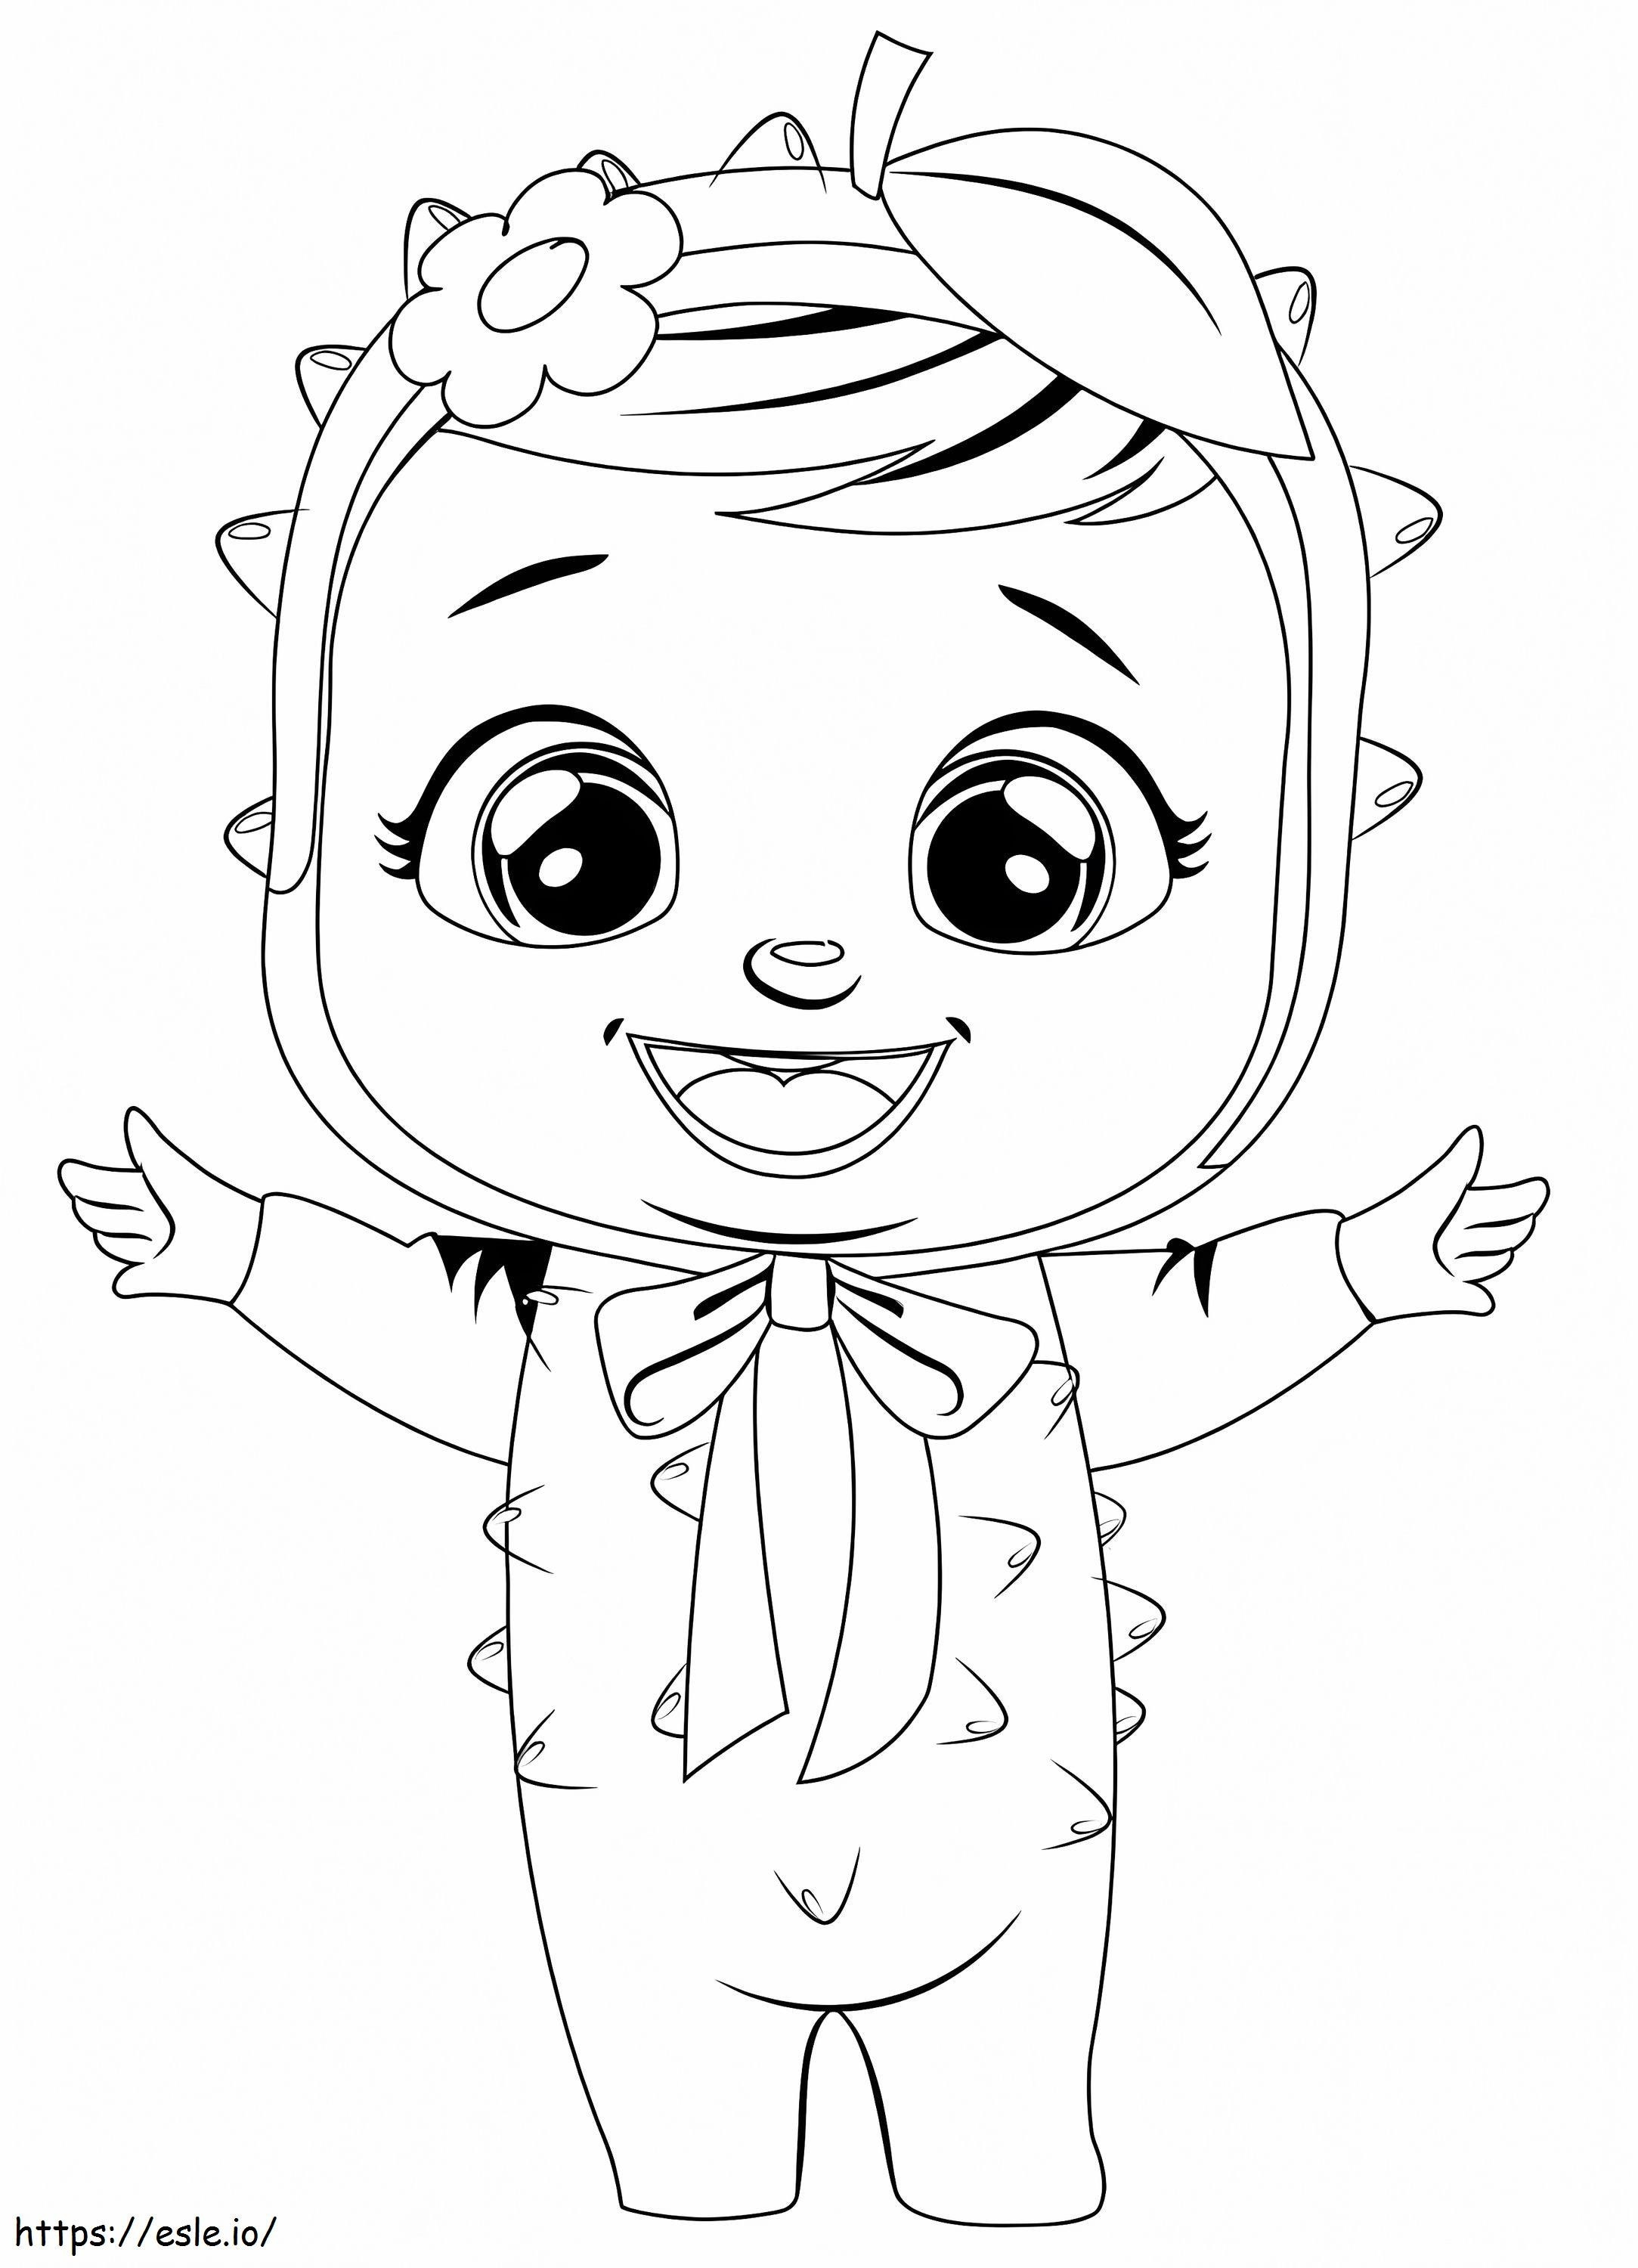 Lexi Cry Babies coloring page